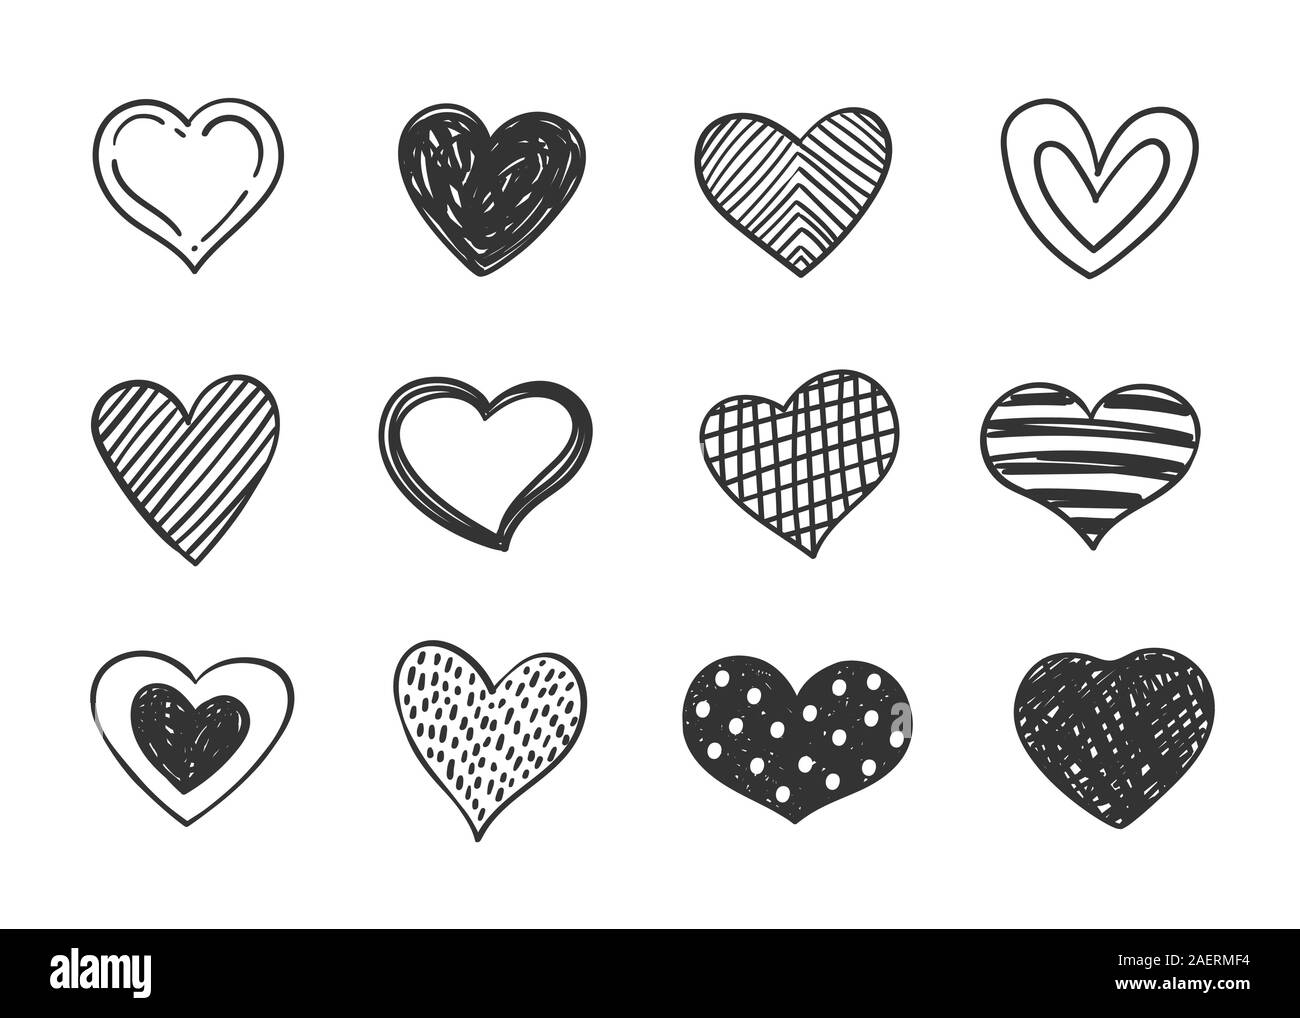 Set of doodle decorated heart shaped symbols. Collection of different hand drawn romantic hearts for web site, Stock Vector